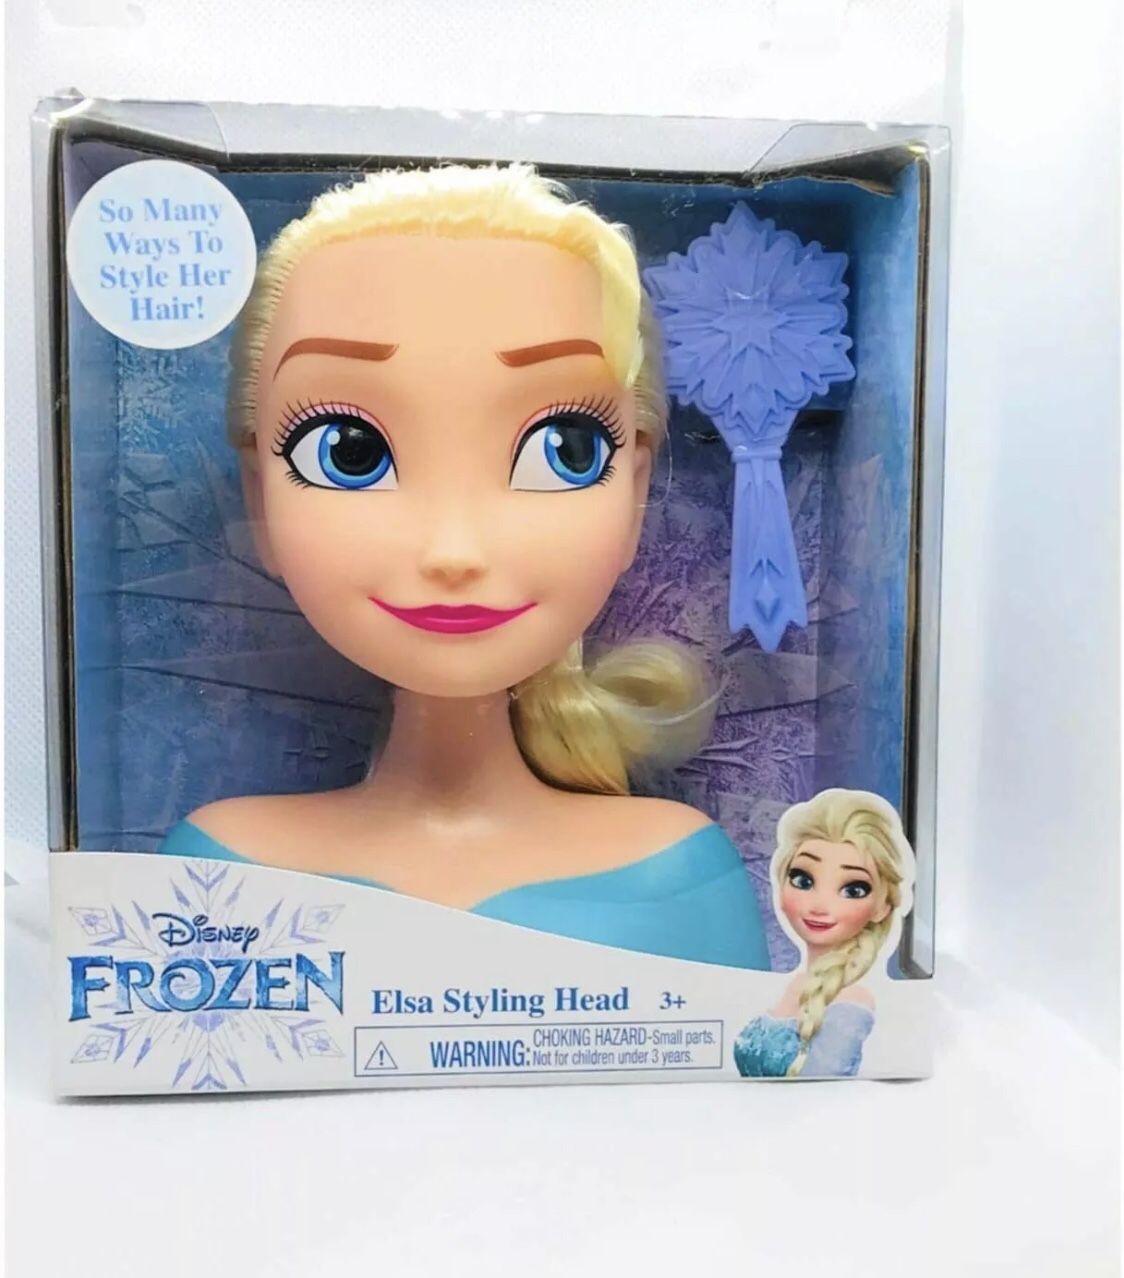 Disney Frozen Elsa 7" Styling Head Brush Included Many Ways to Style Hair News